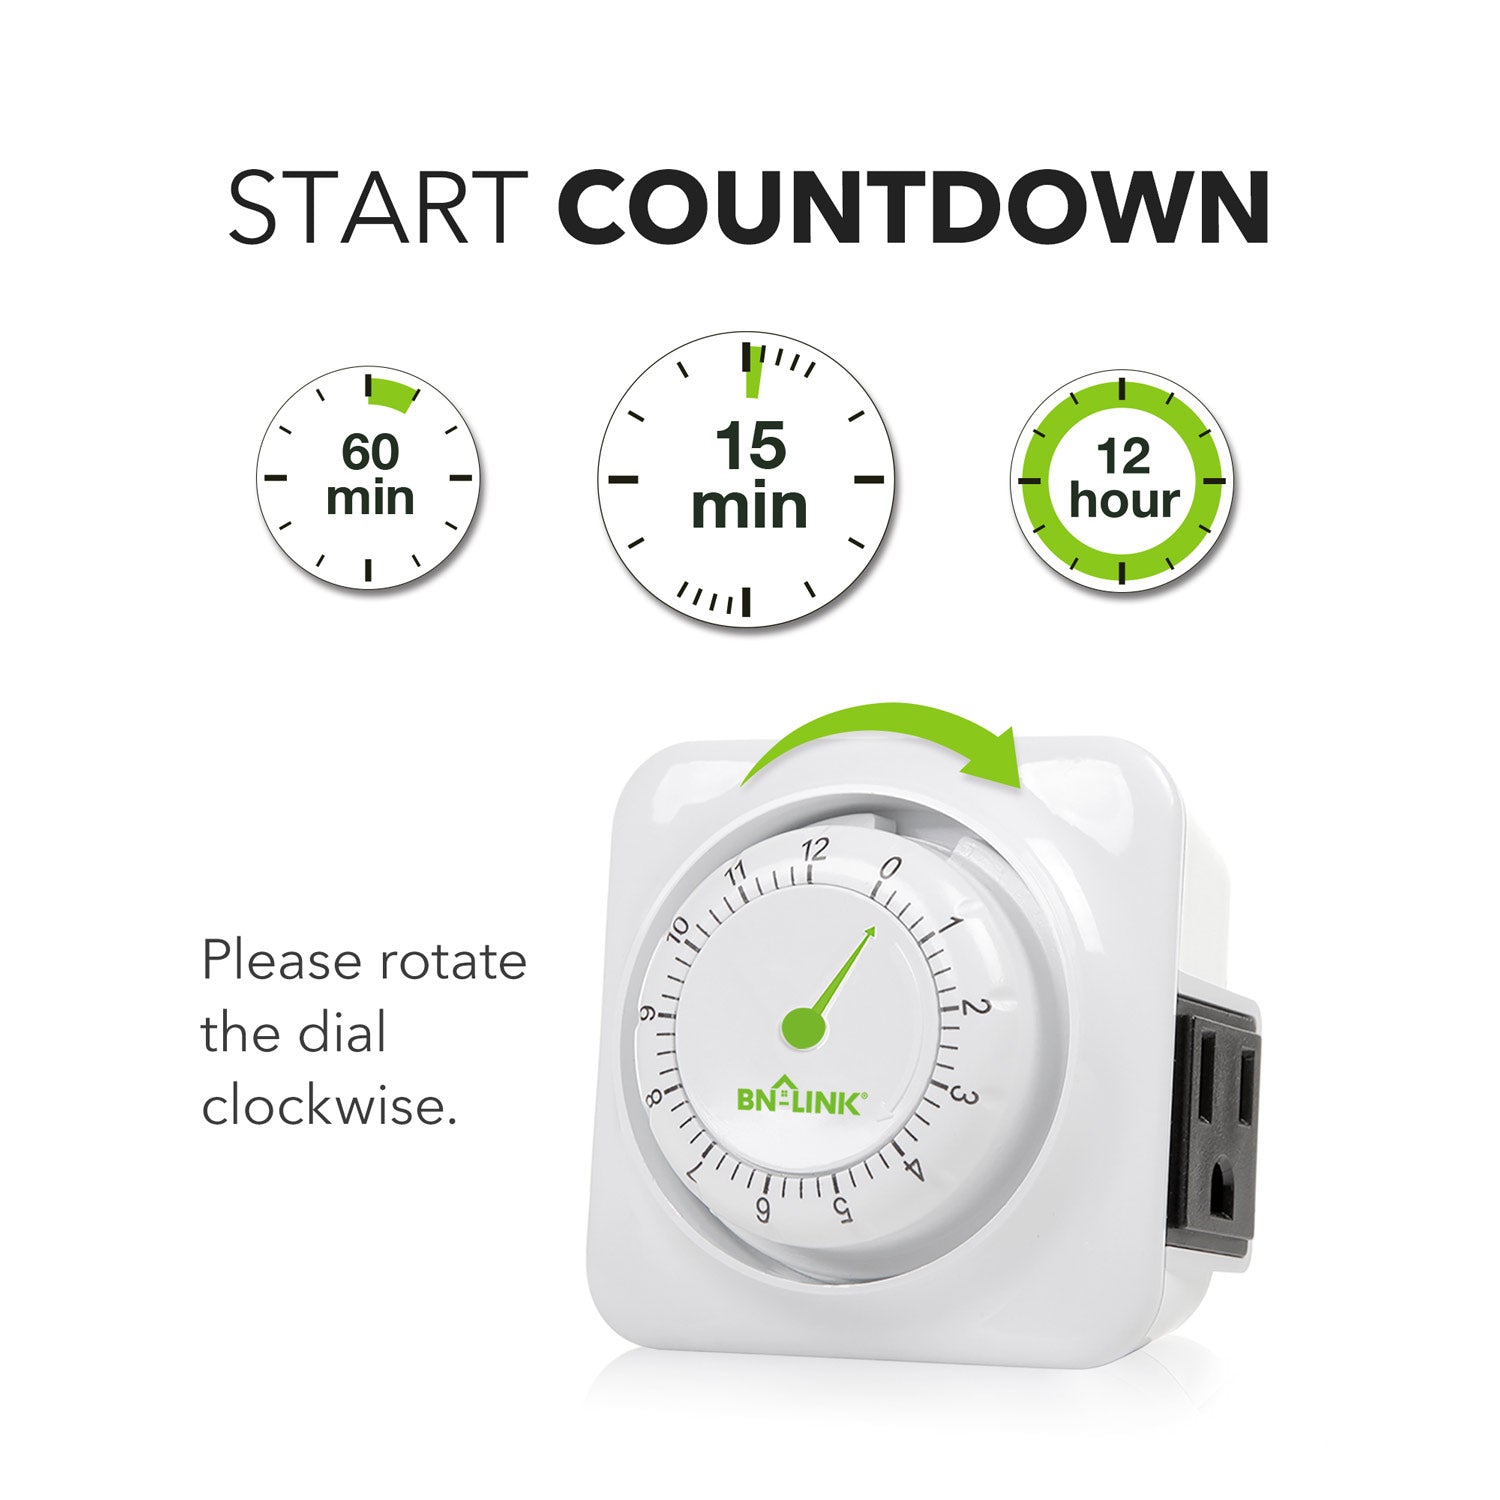 3 Days to Go Countdown Timer Graphic by DG-Studio · Creative Fabrica